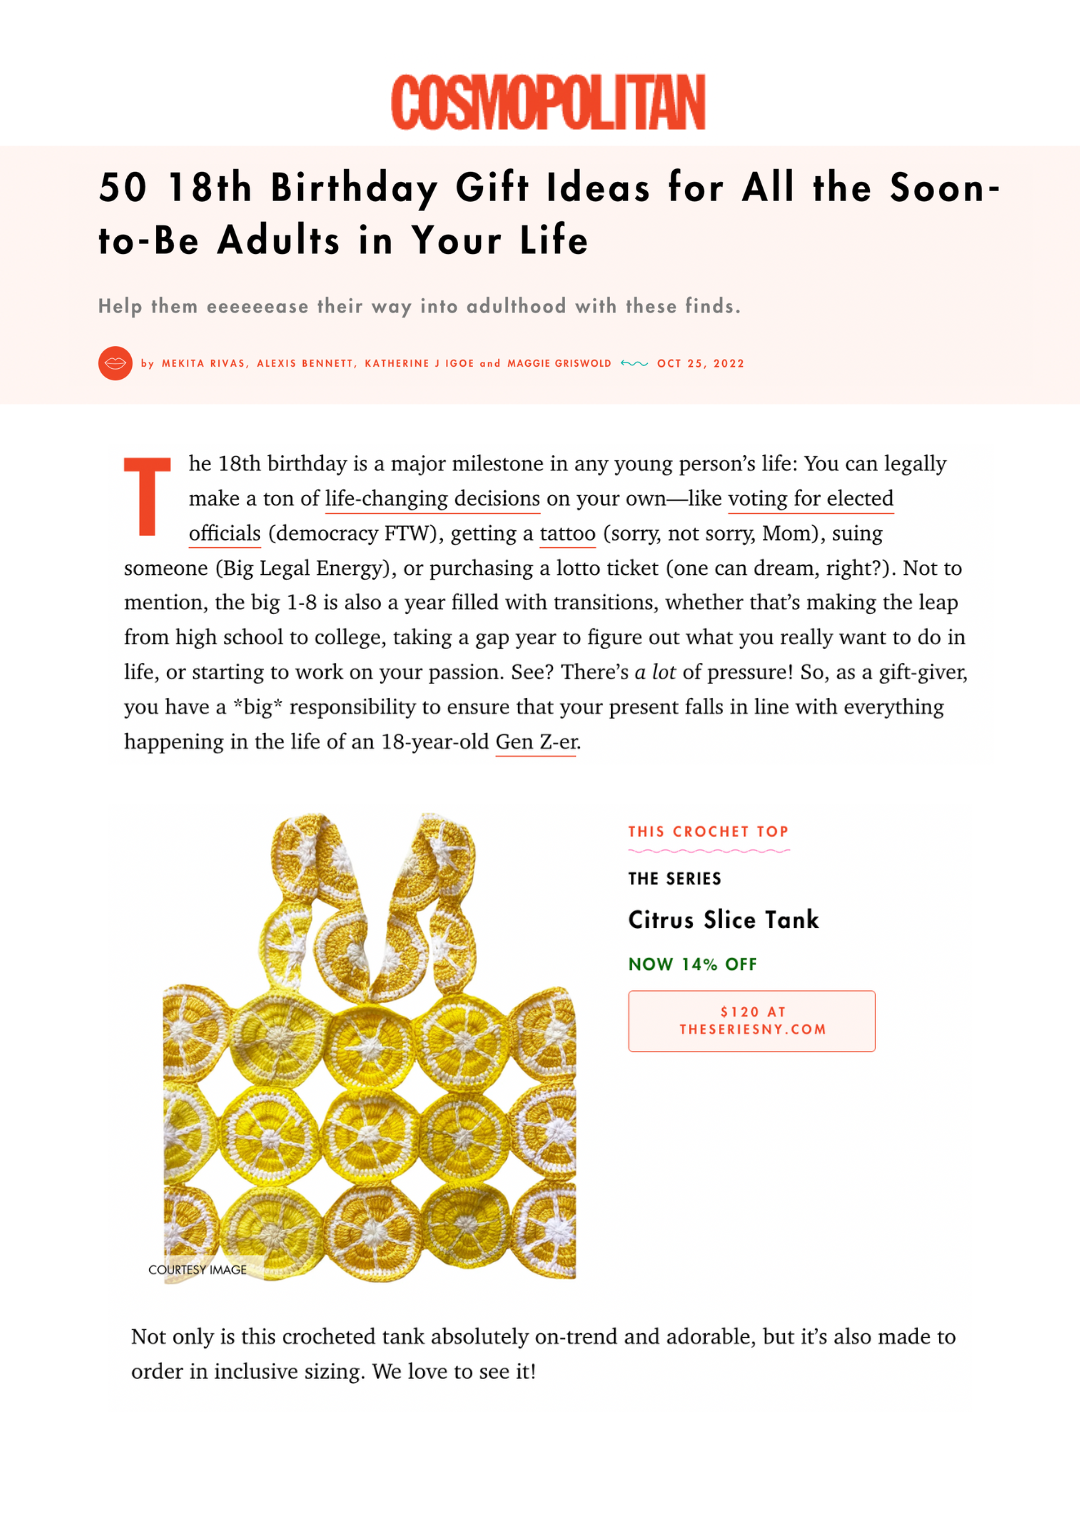 COSMOPOLITAN | 50 18th Birthday Gift Ideas for All the Soon-to-Be Adults in Your Life